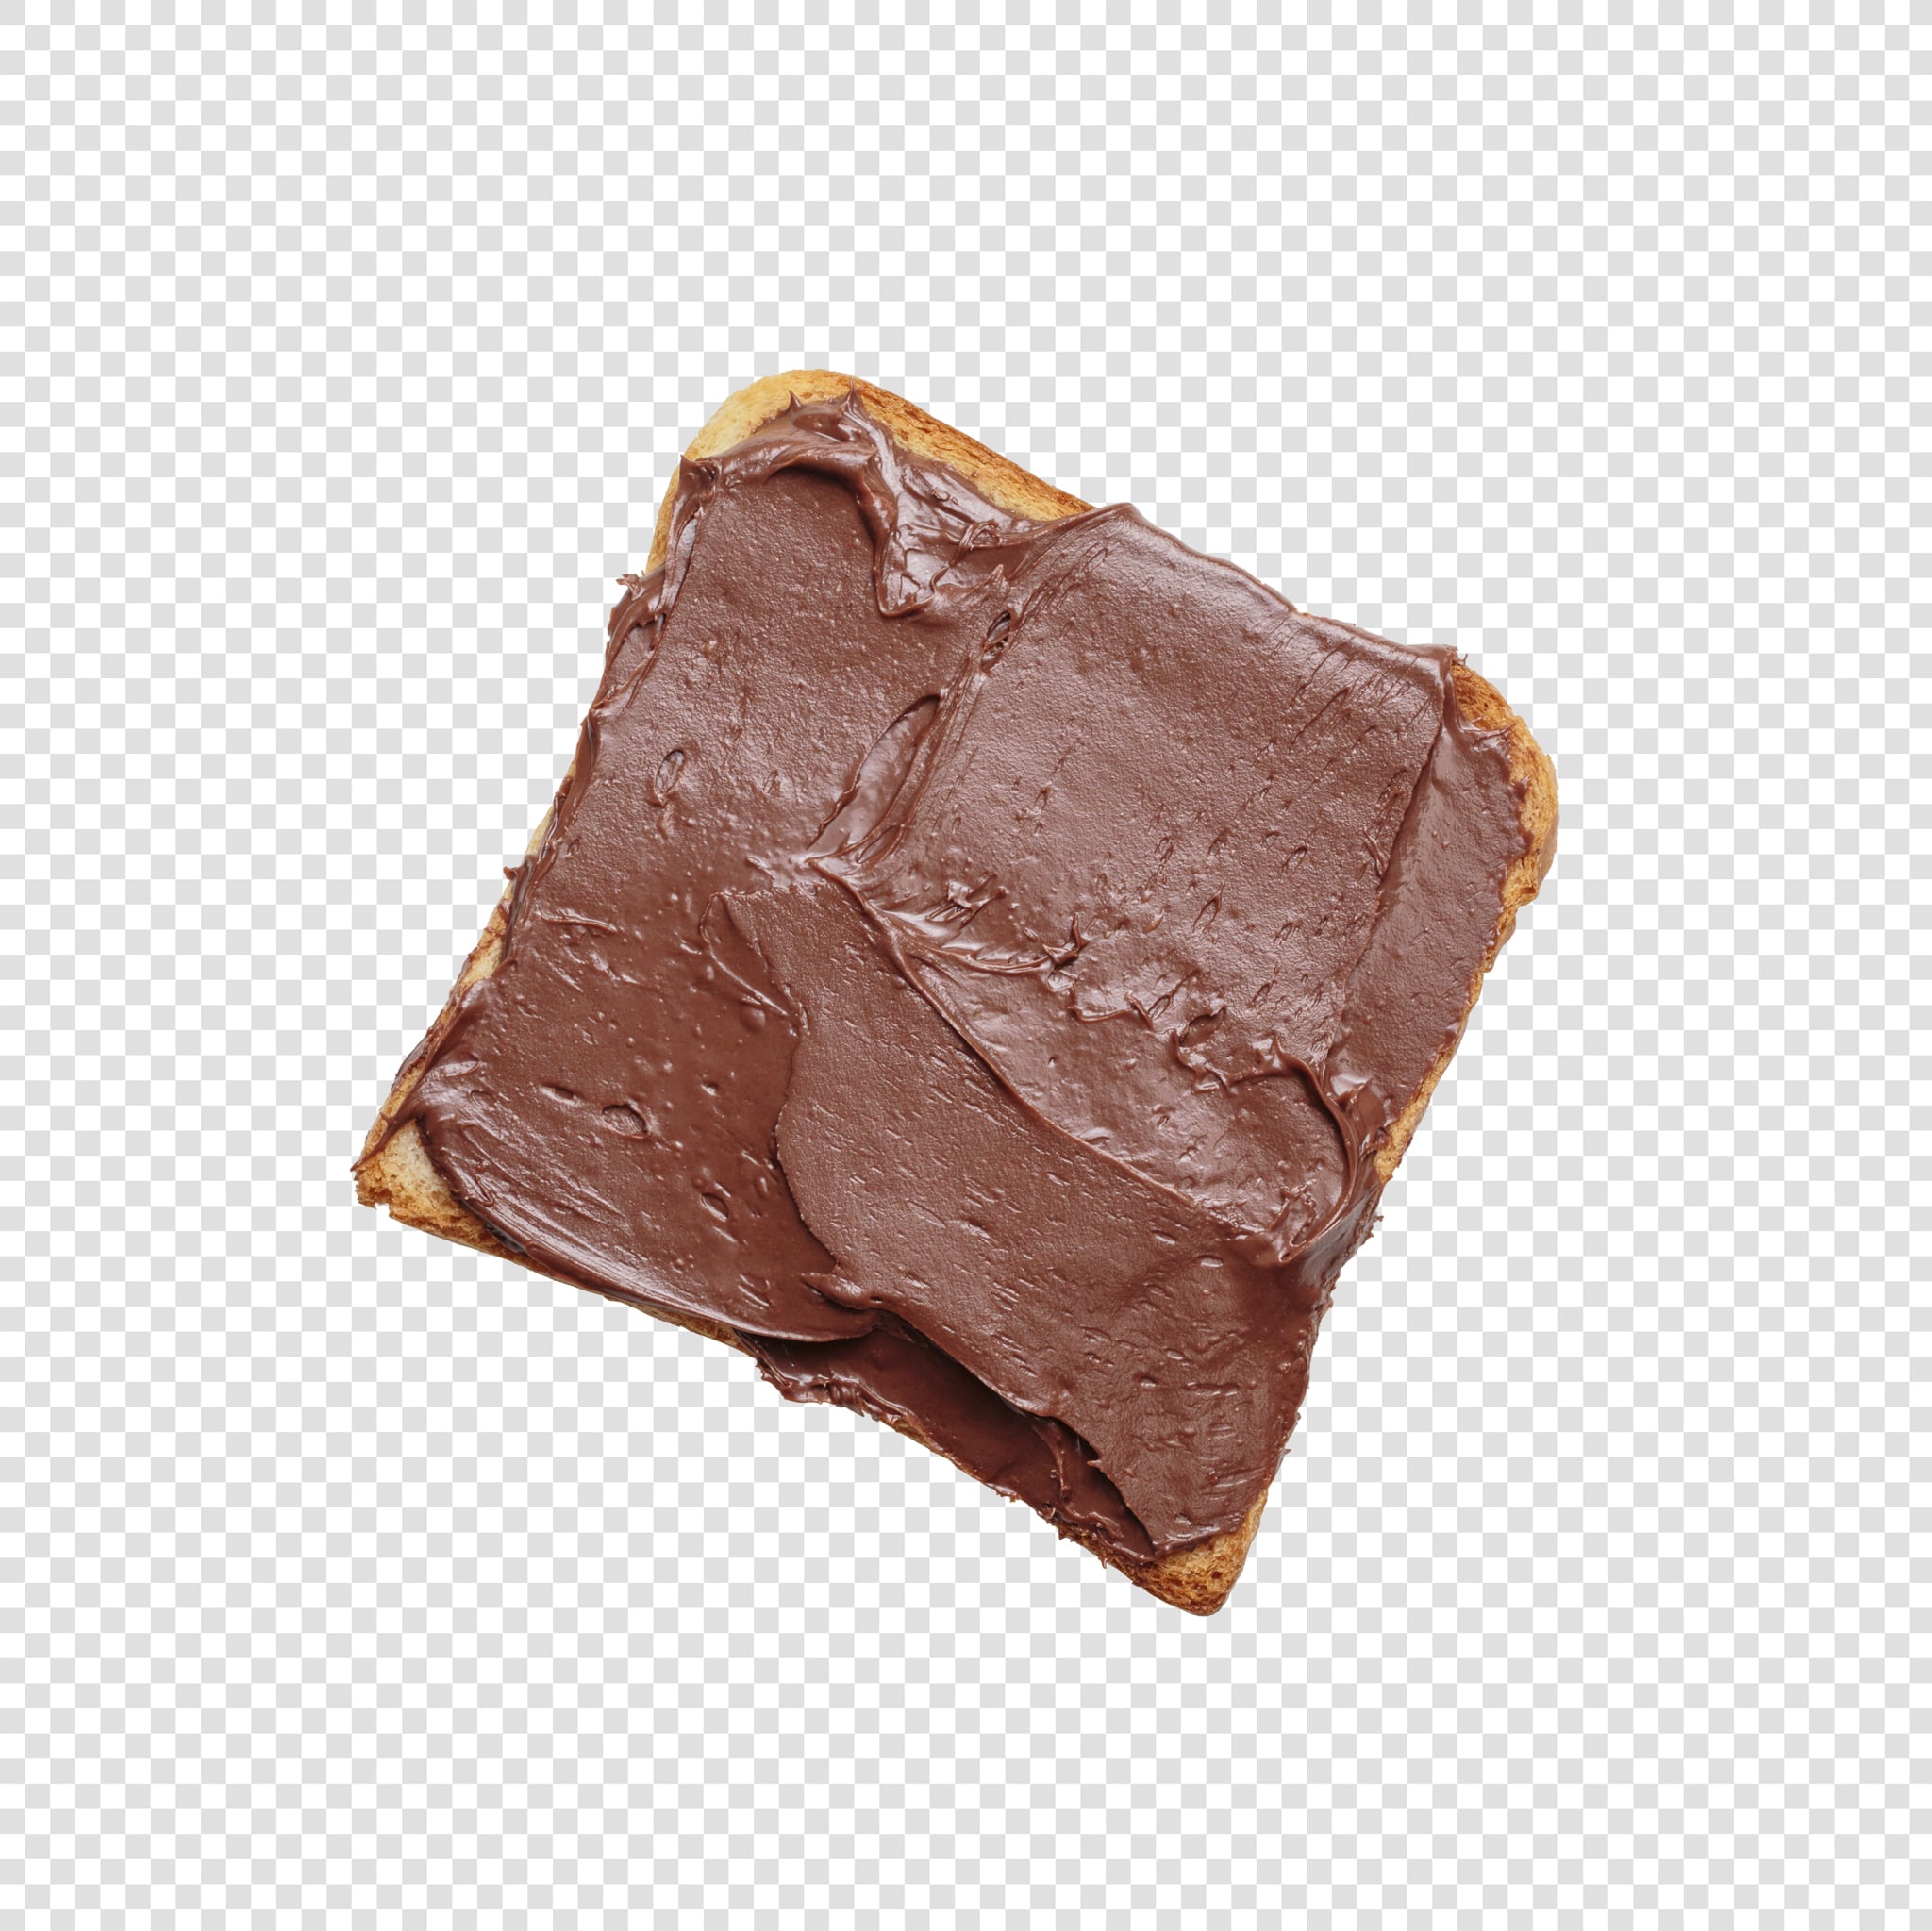 Chocolate image asset with transparent background